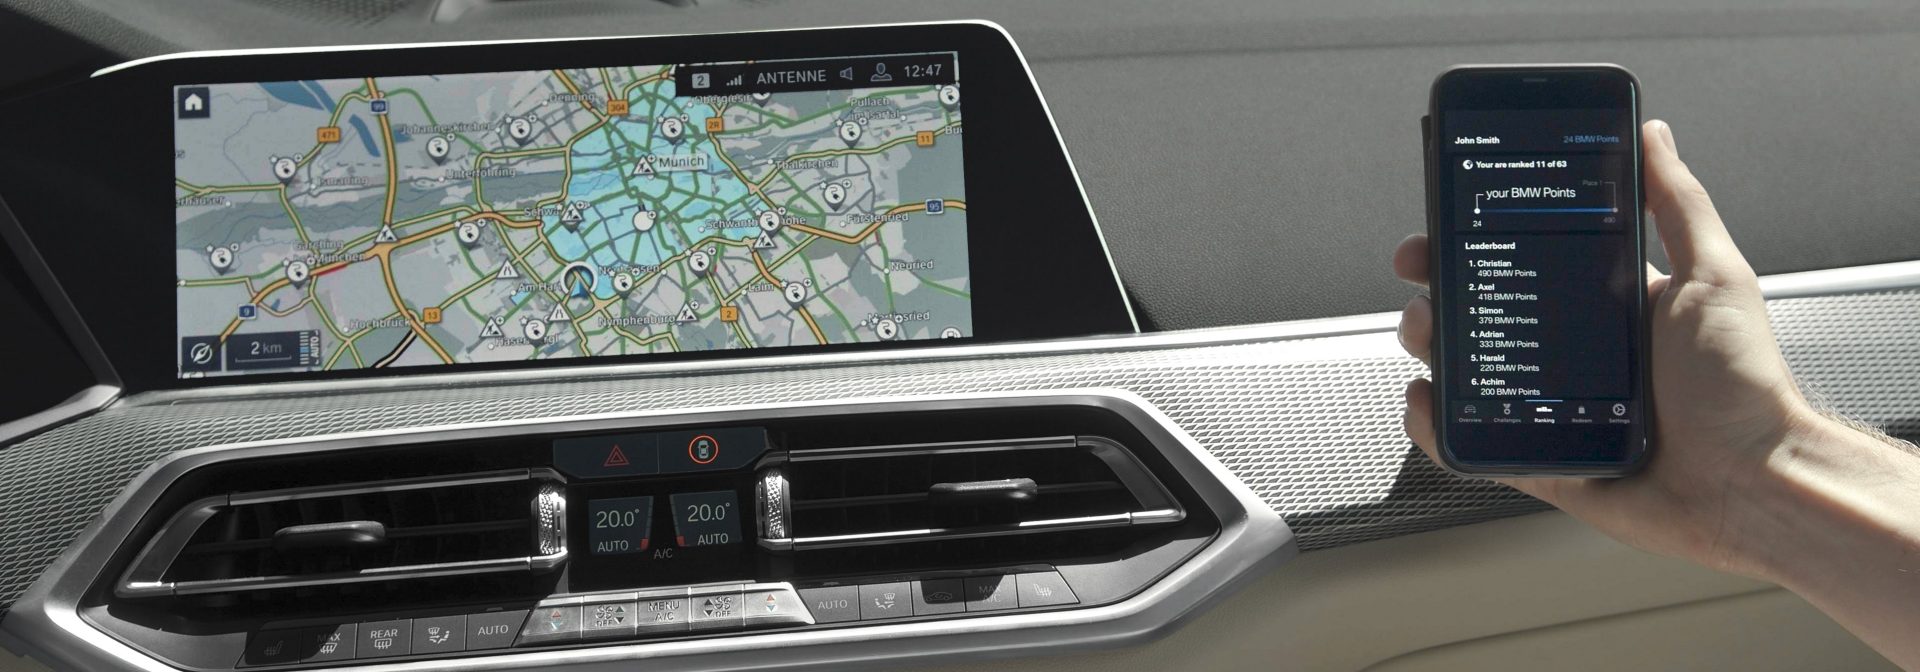 Display in BMW with map